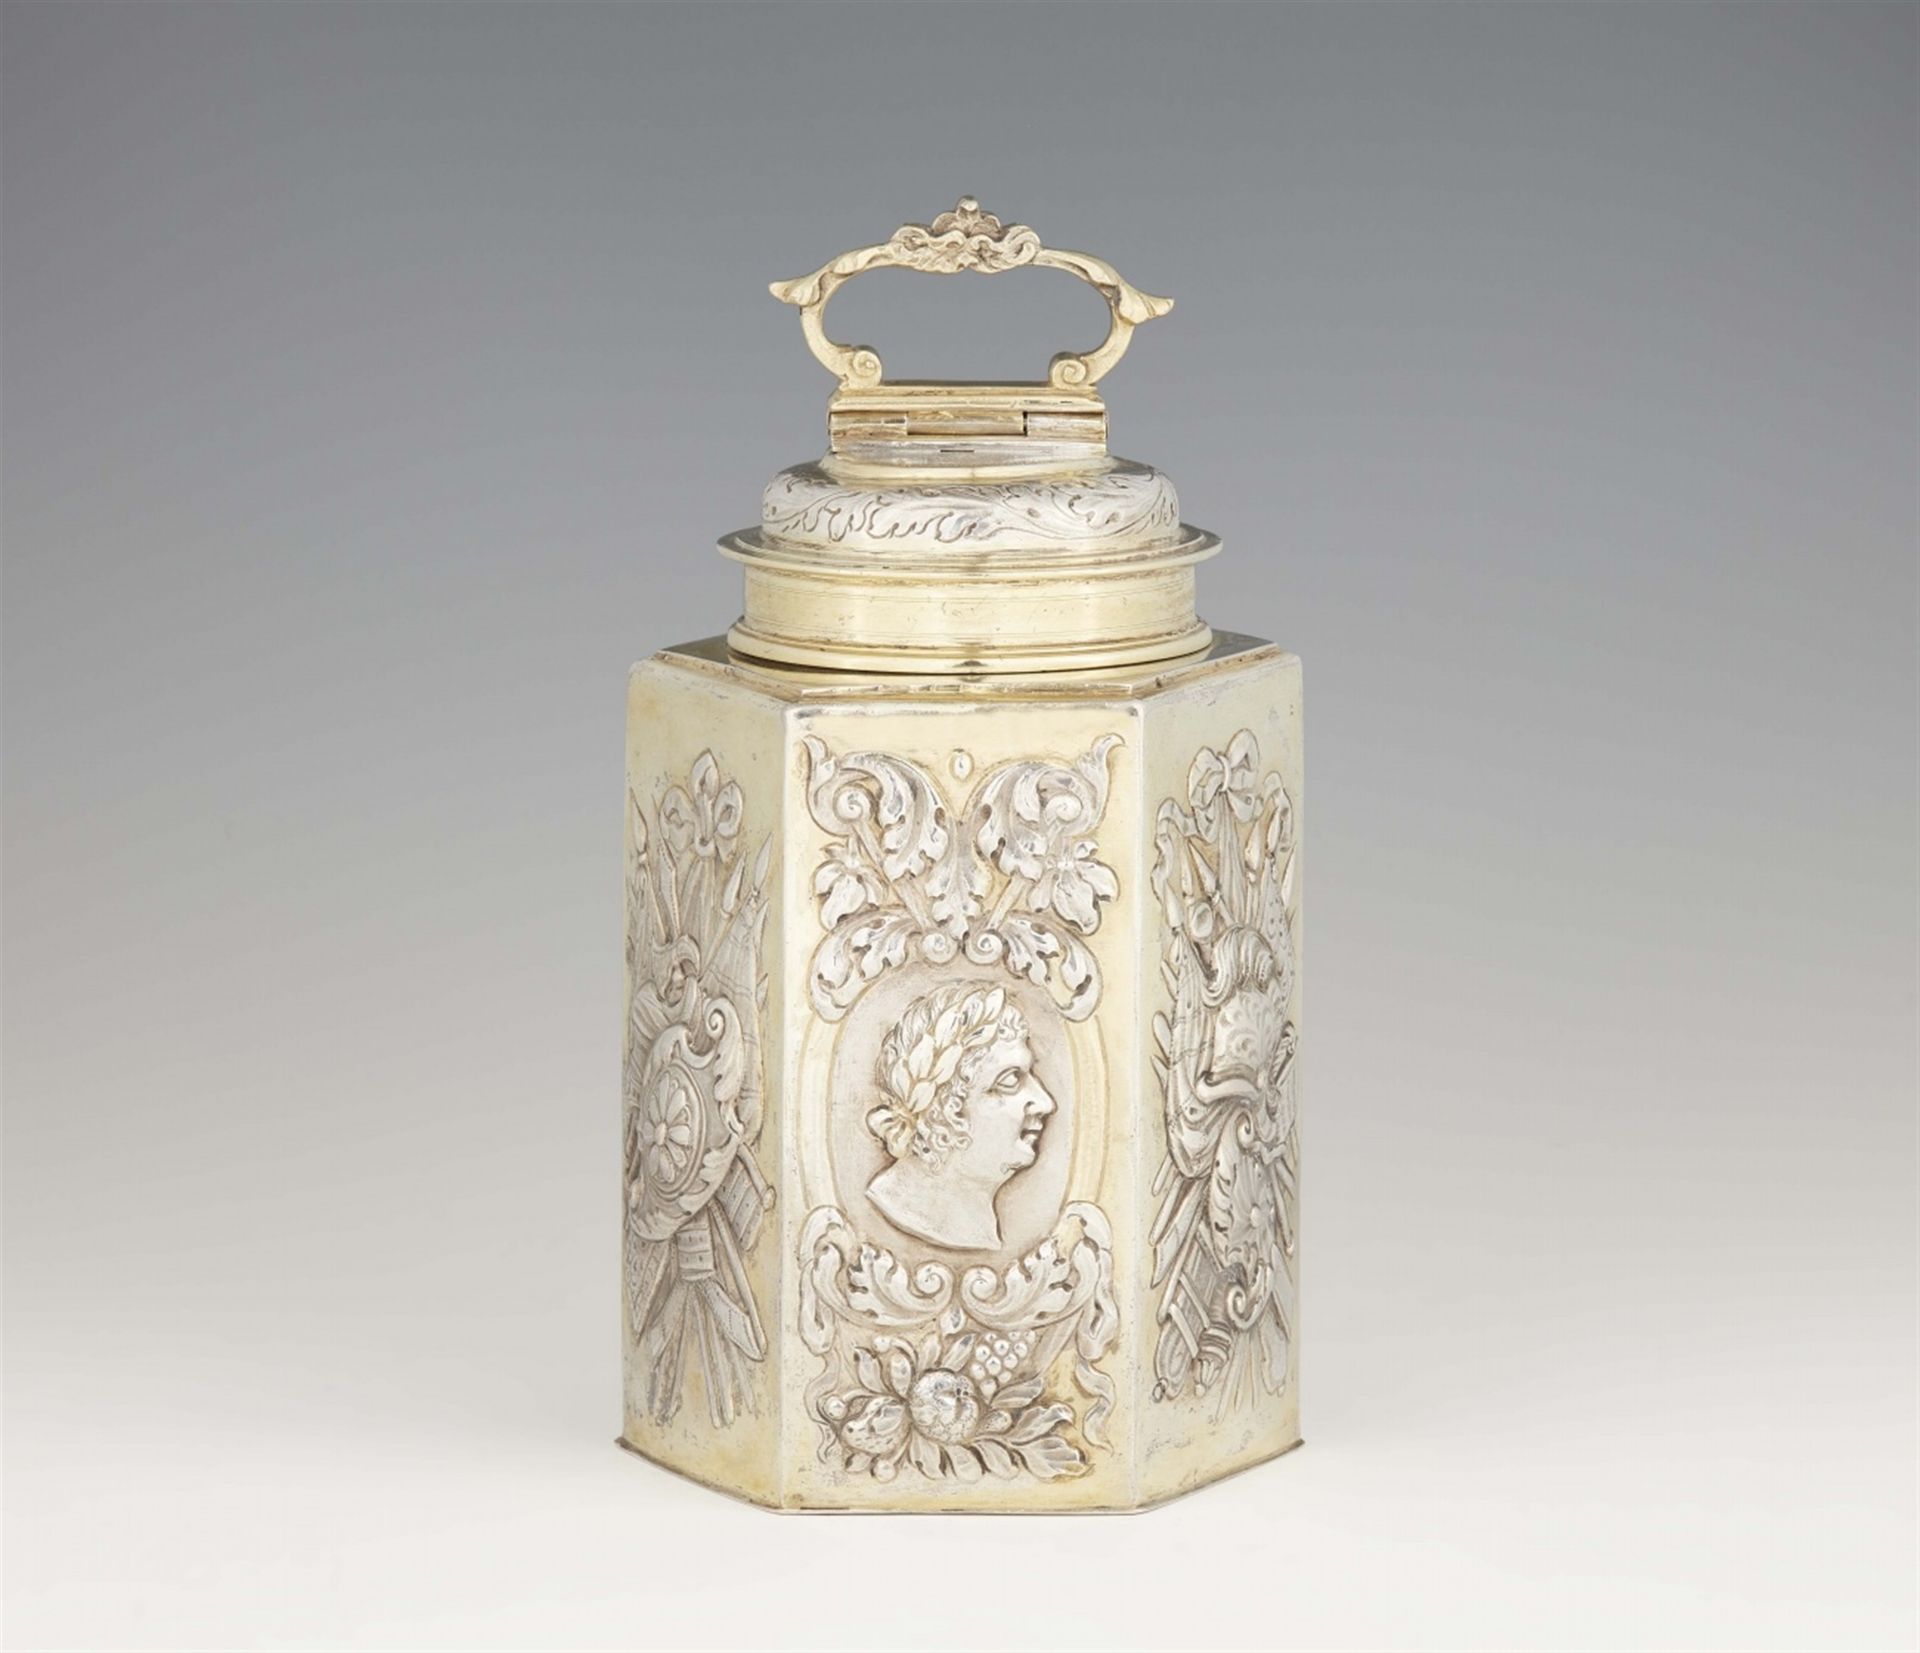 An important Leipzig silver flask